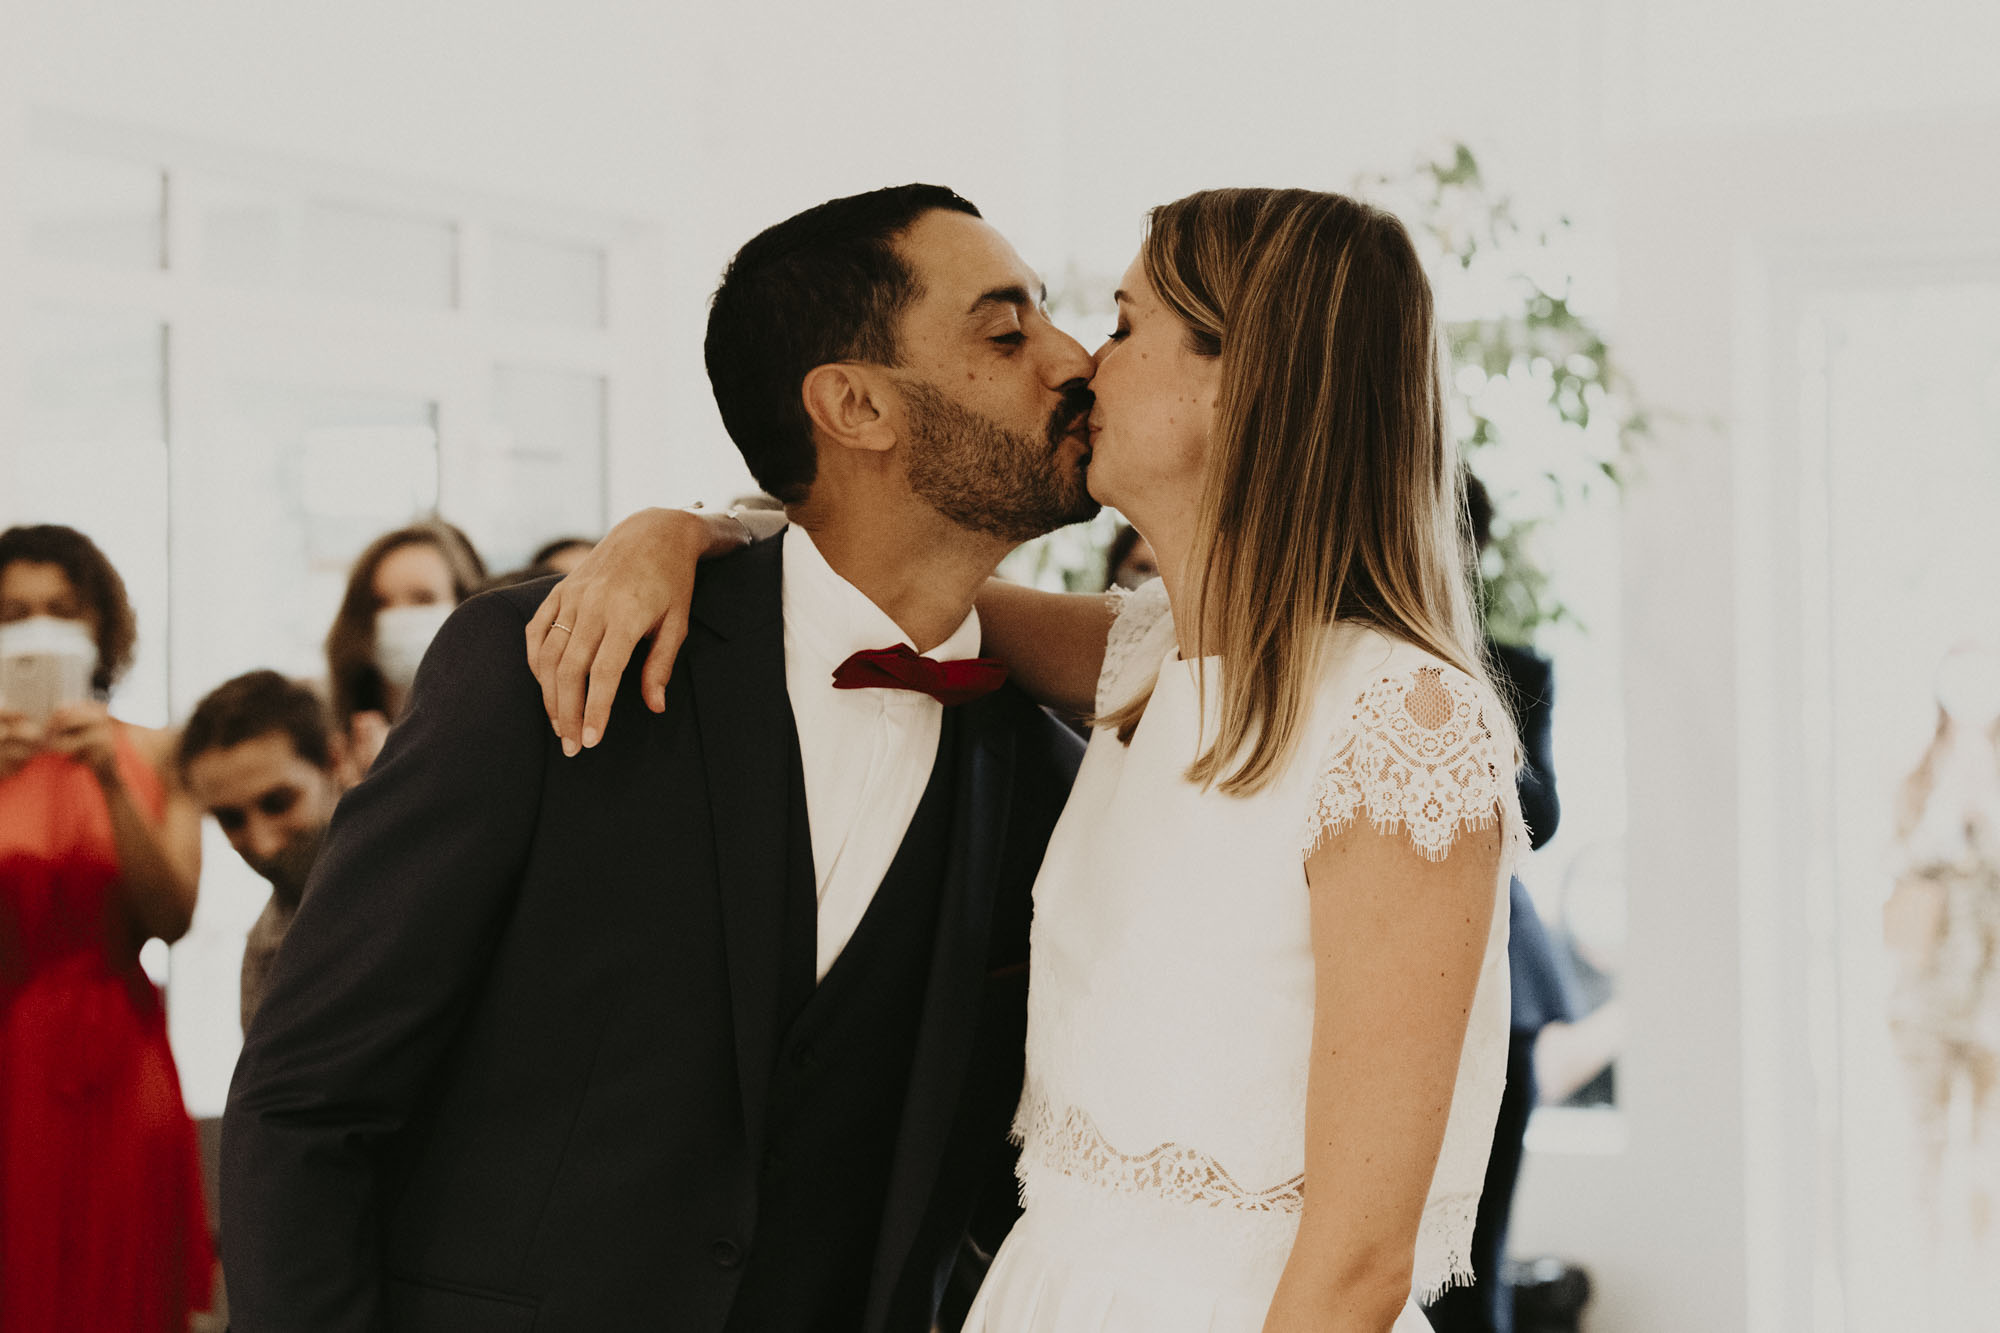 Arcachon wedding photographer: the newlyweds kiss during the ceremony